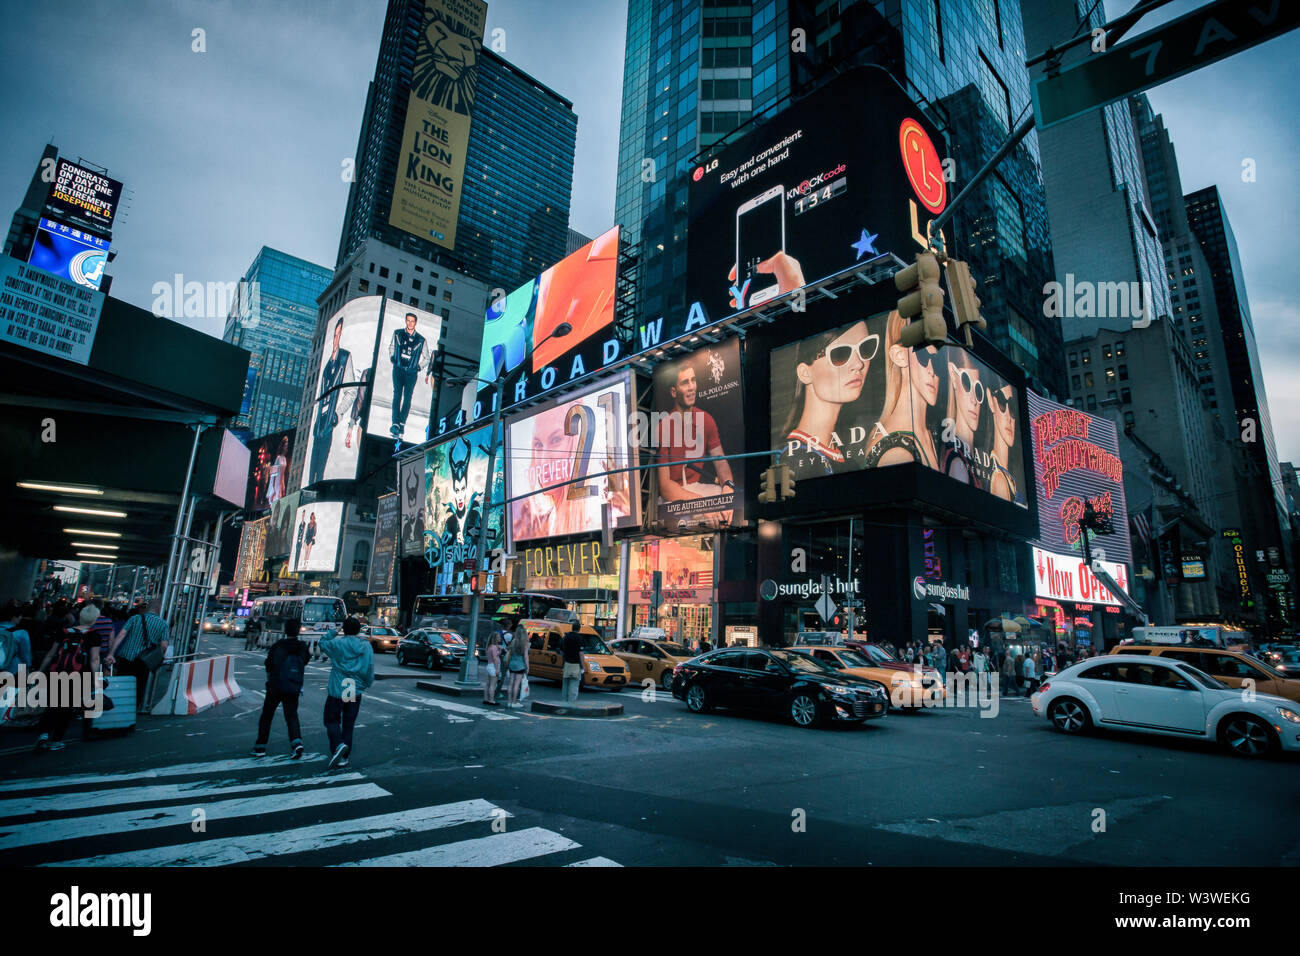 New York City, USA - May 20, 2014: Times Square during a calm evening. People are walking on the sidewalks, taxis are on the street and advertising bi Stock Photo